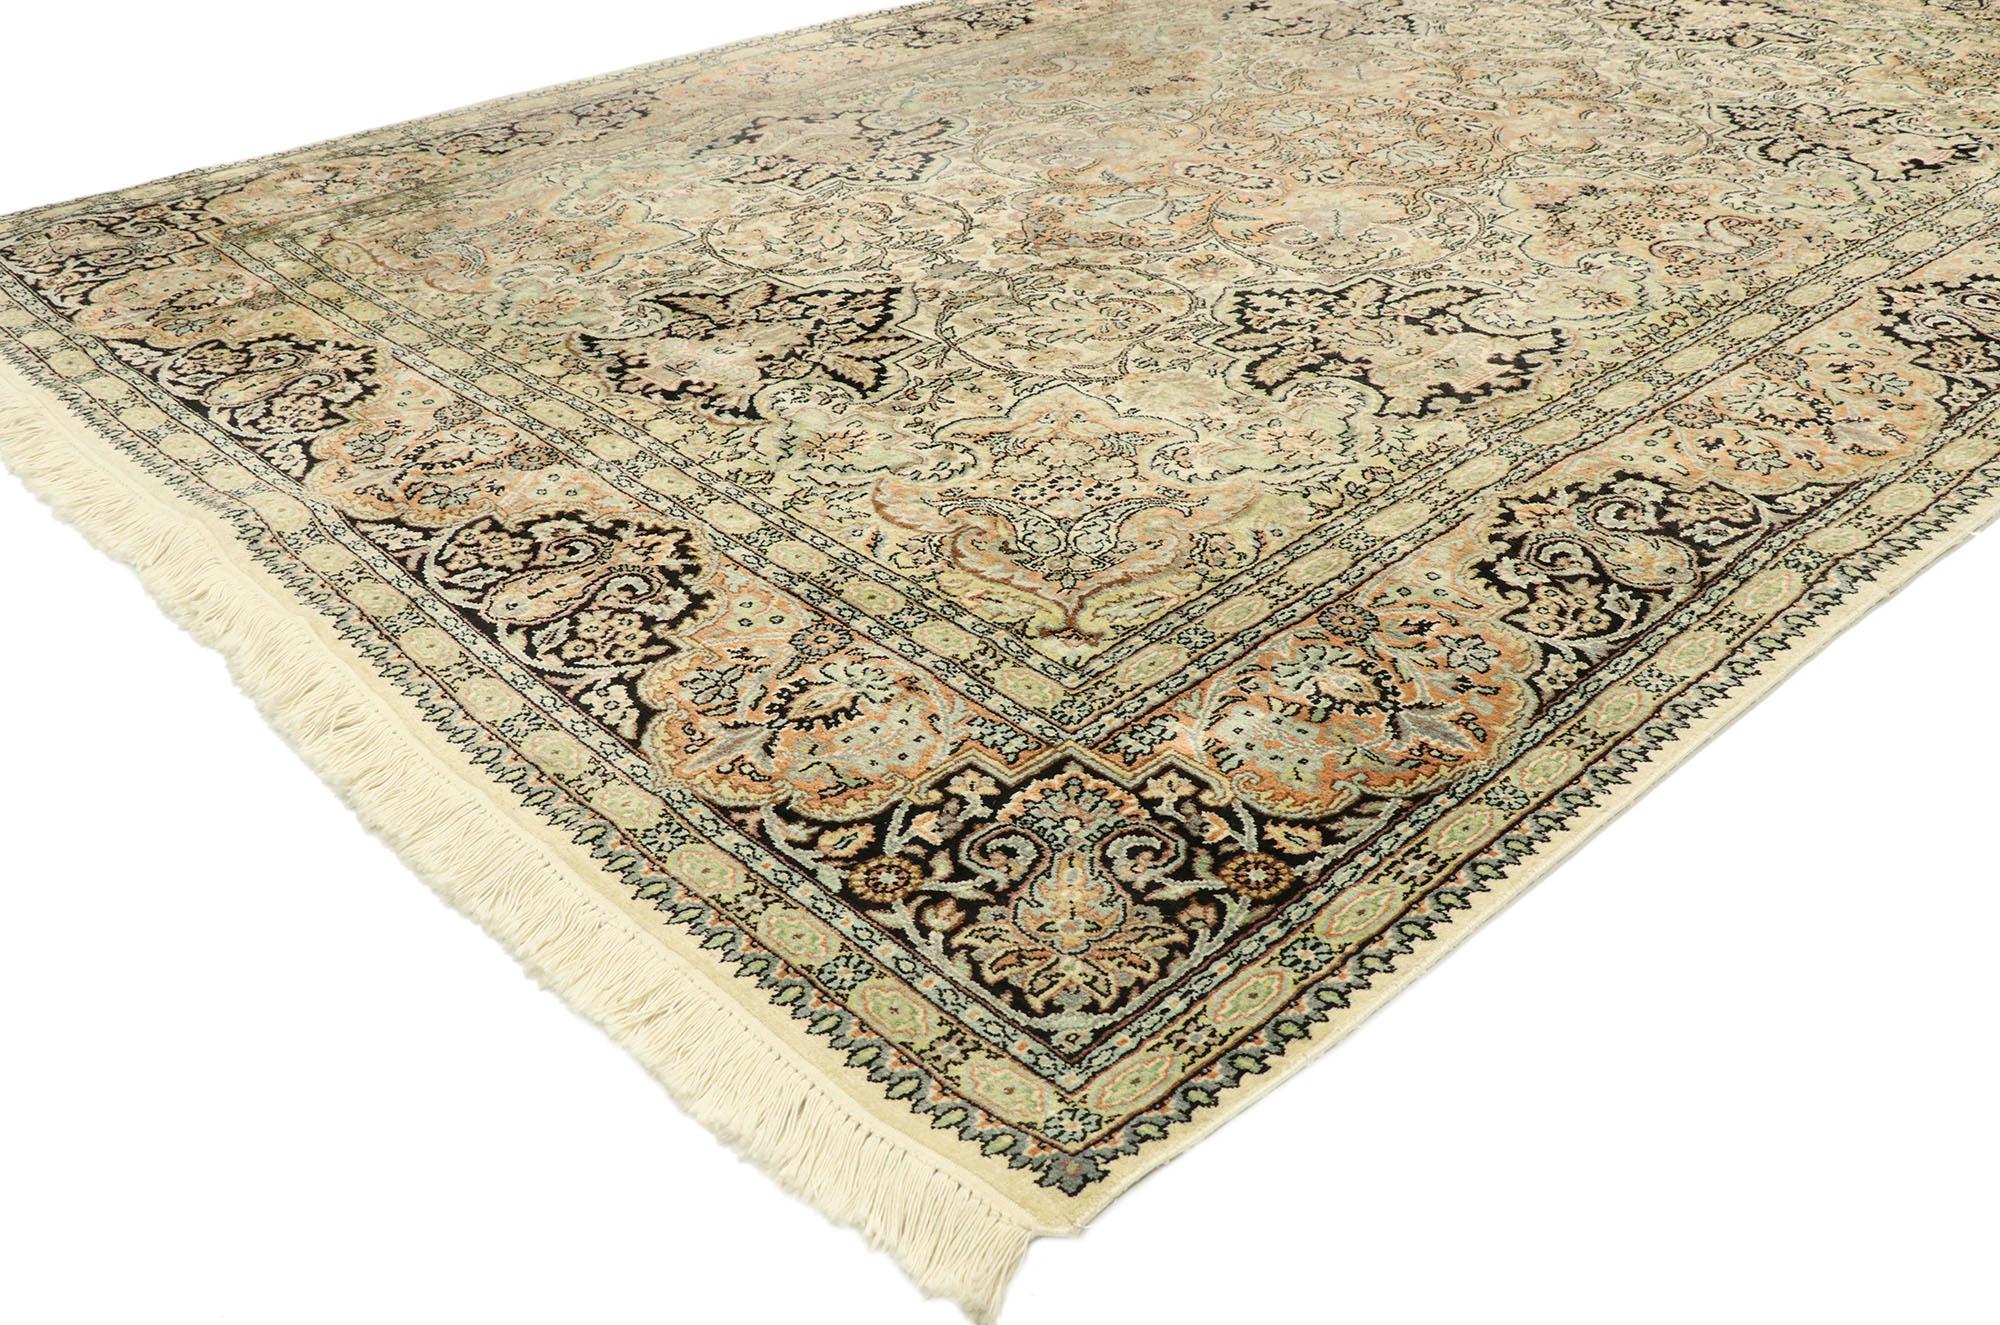 77533 vintage Indian Kashmir rug with Art Nouveau Rococo style. With ornate details and well-balanced symmetry combined with a dreamy color palette, this hand knotted wool vintage Indian Kashmir rug beautifully embodies both Art Nouveau and Rococo